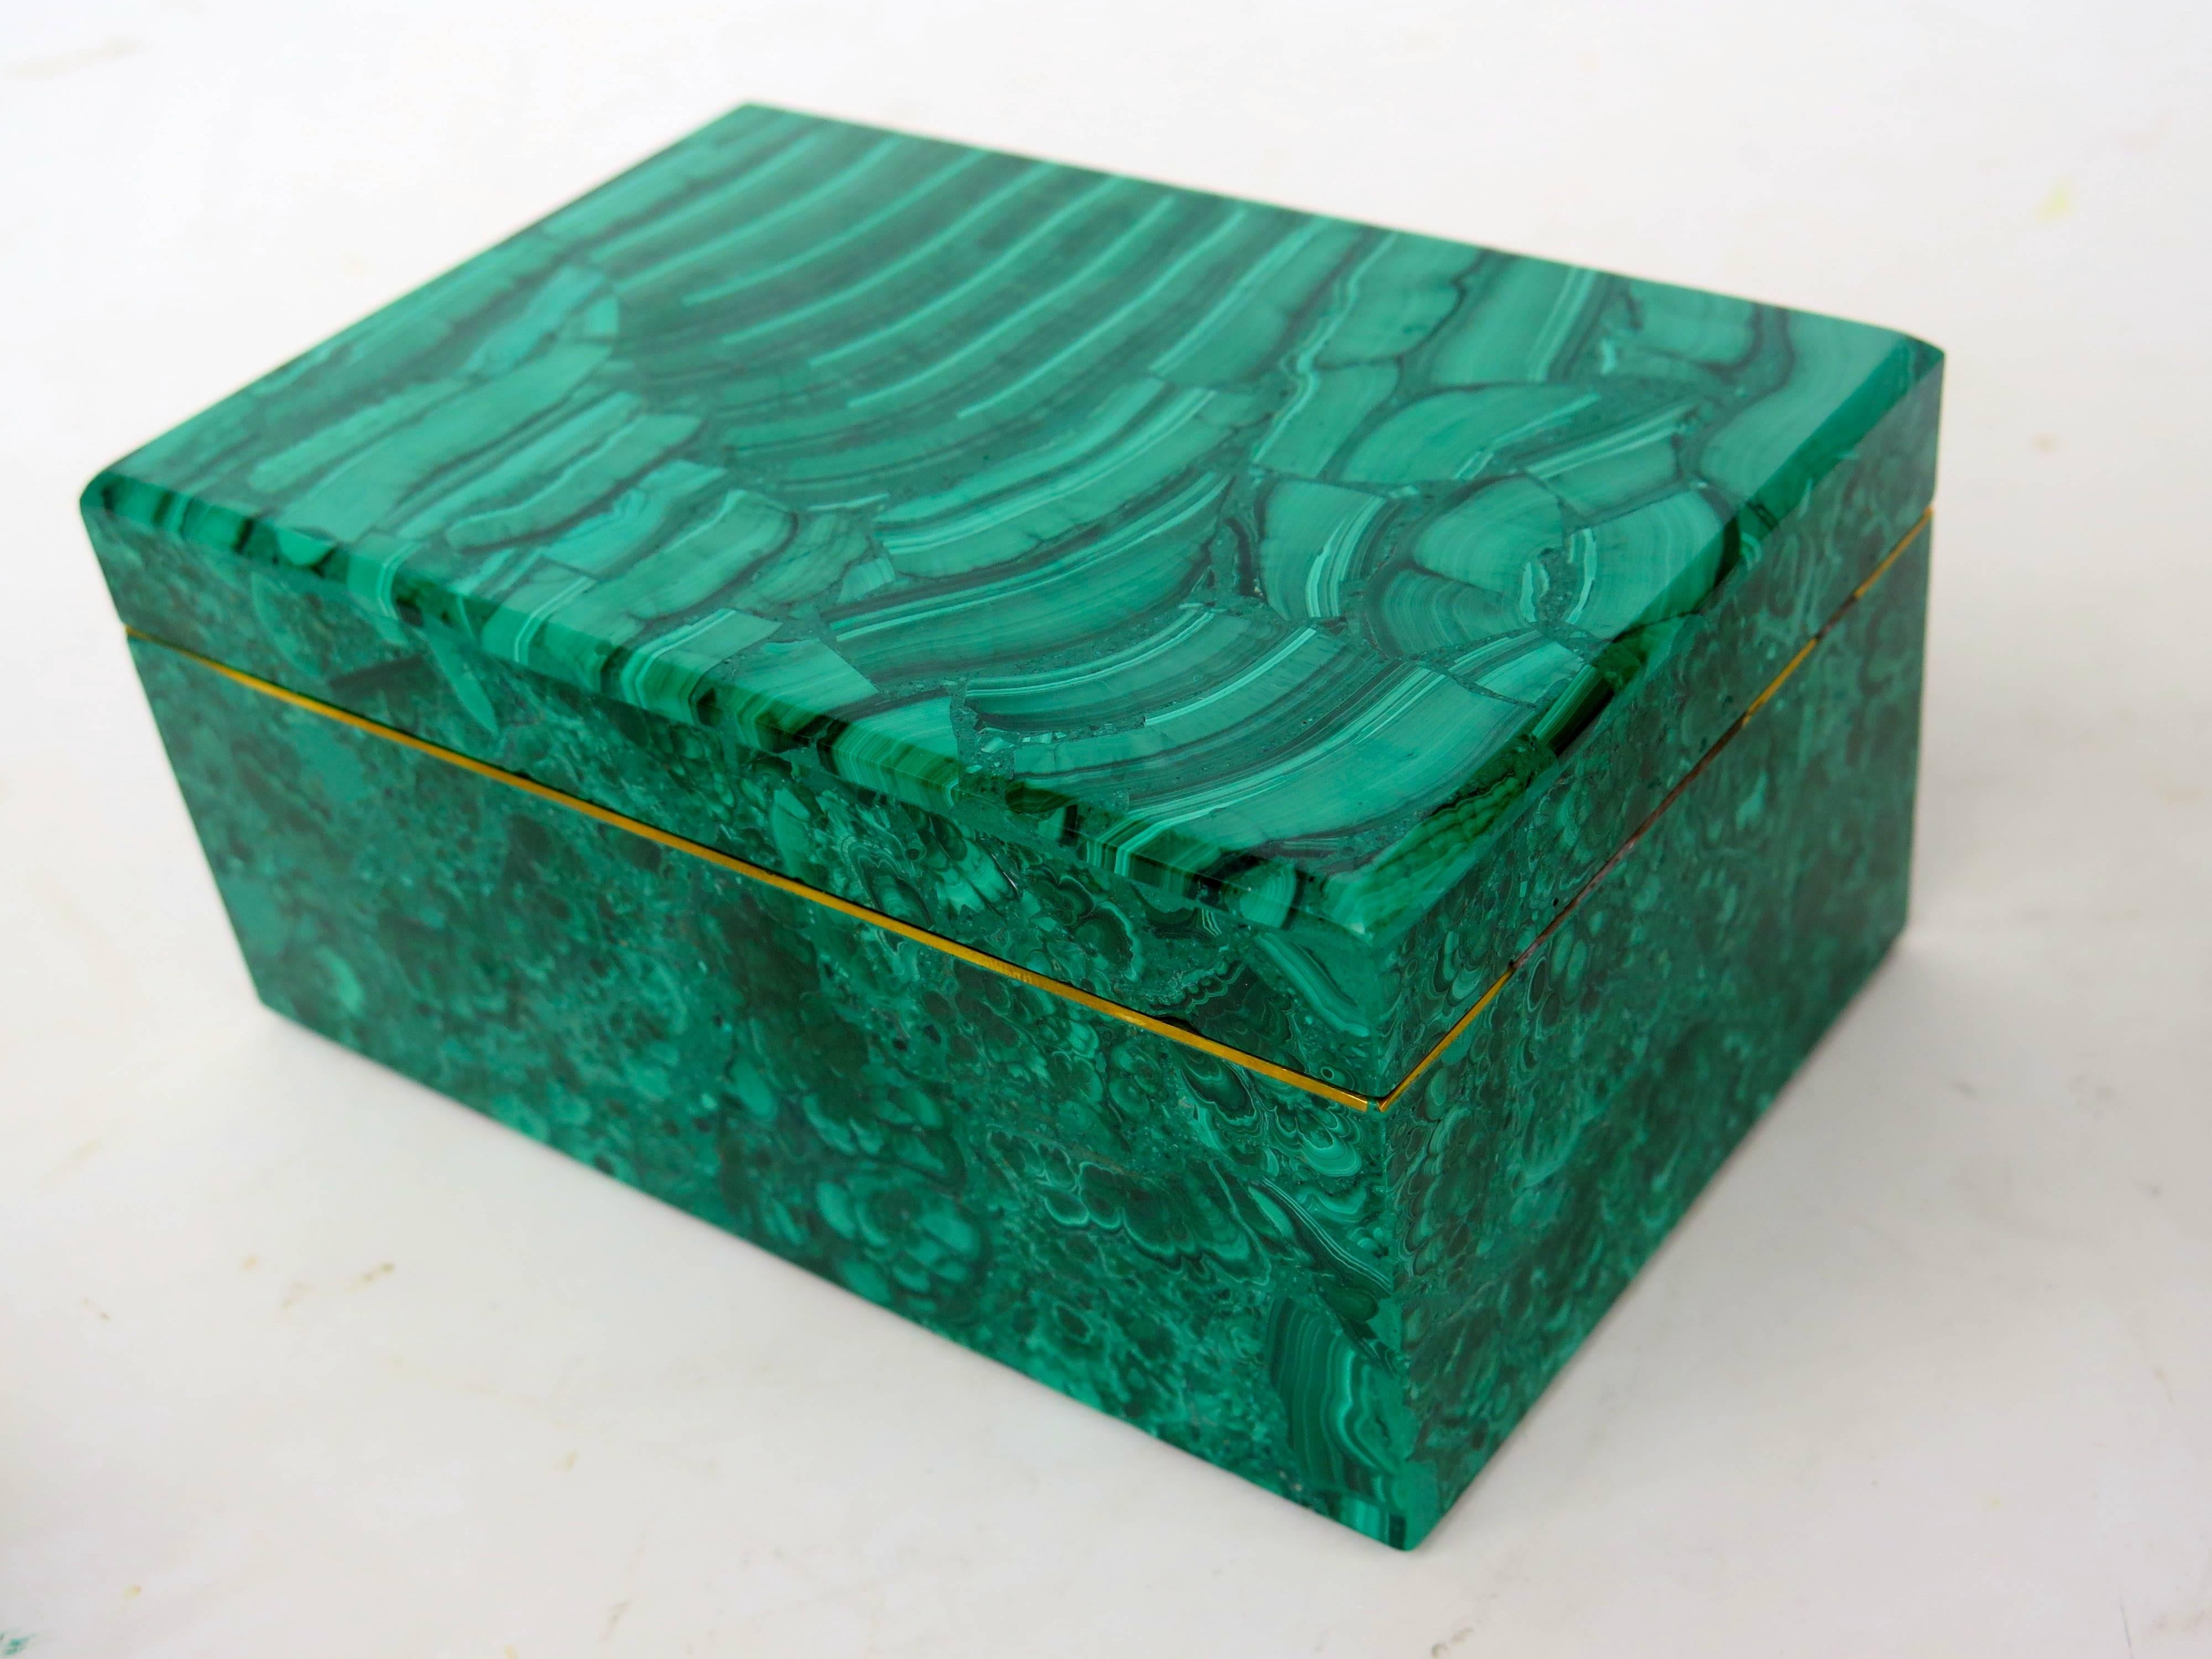 Recently purchased collection of beautiful malachite boxes, two with brass trim. They are priced as a group, but can be purchased separately.
Large 6.25" W x 4.25" D x 3" T.
Medium 5.5" x 3.75" x 2.75".
Hex